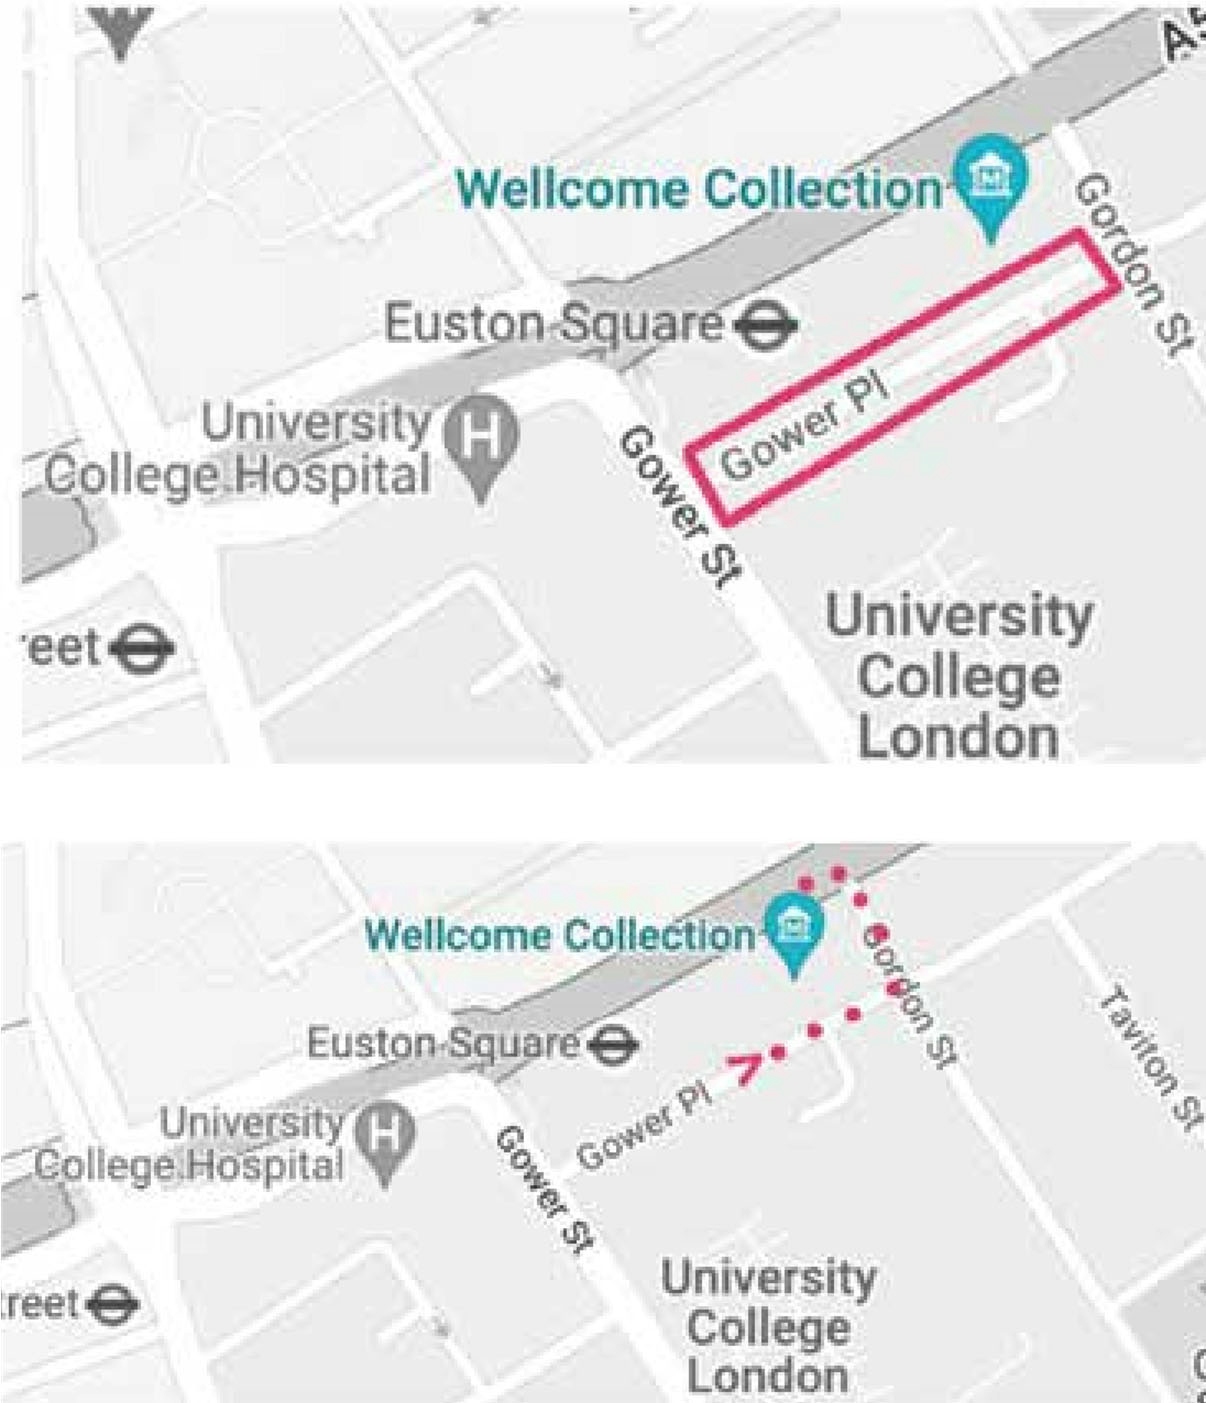 Details from two sections of map showing the location of Gower Place in one and the route to the front entrance of Wellcome Collection from Gower Place in the other.